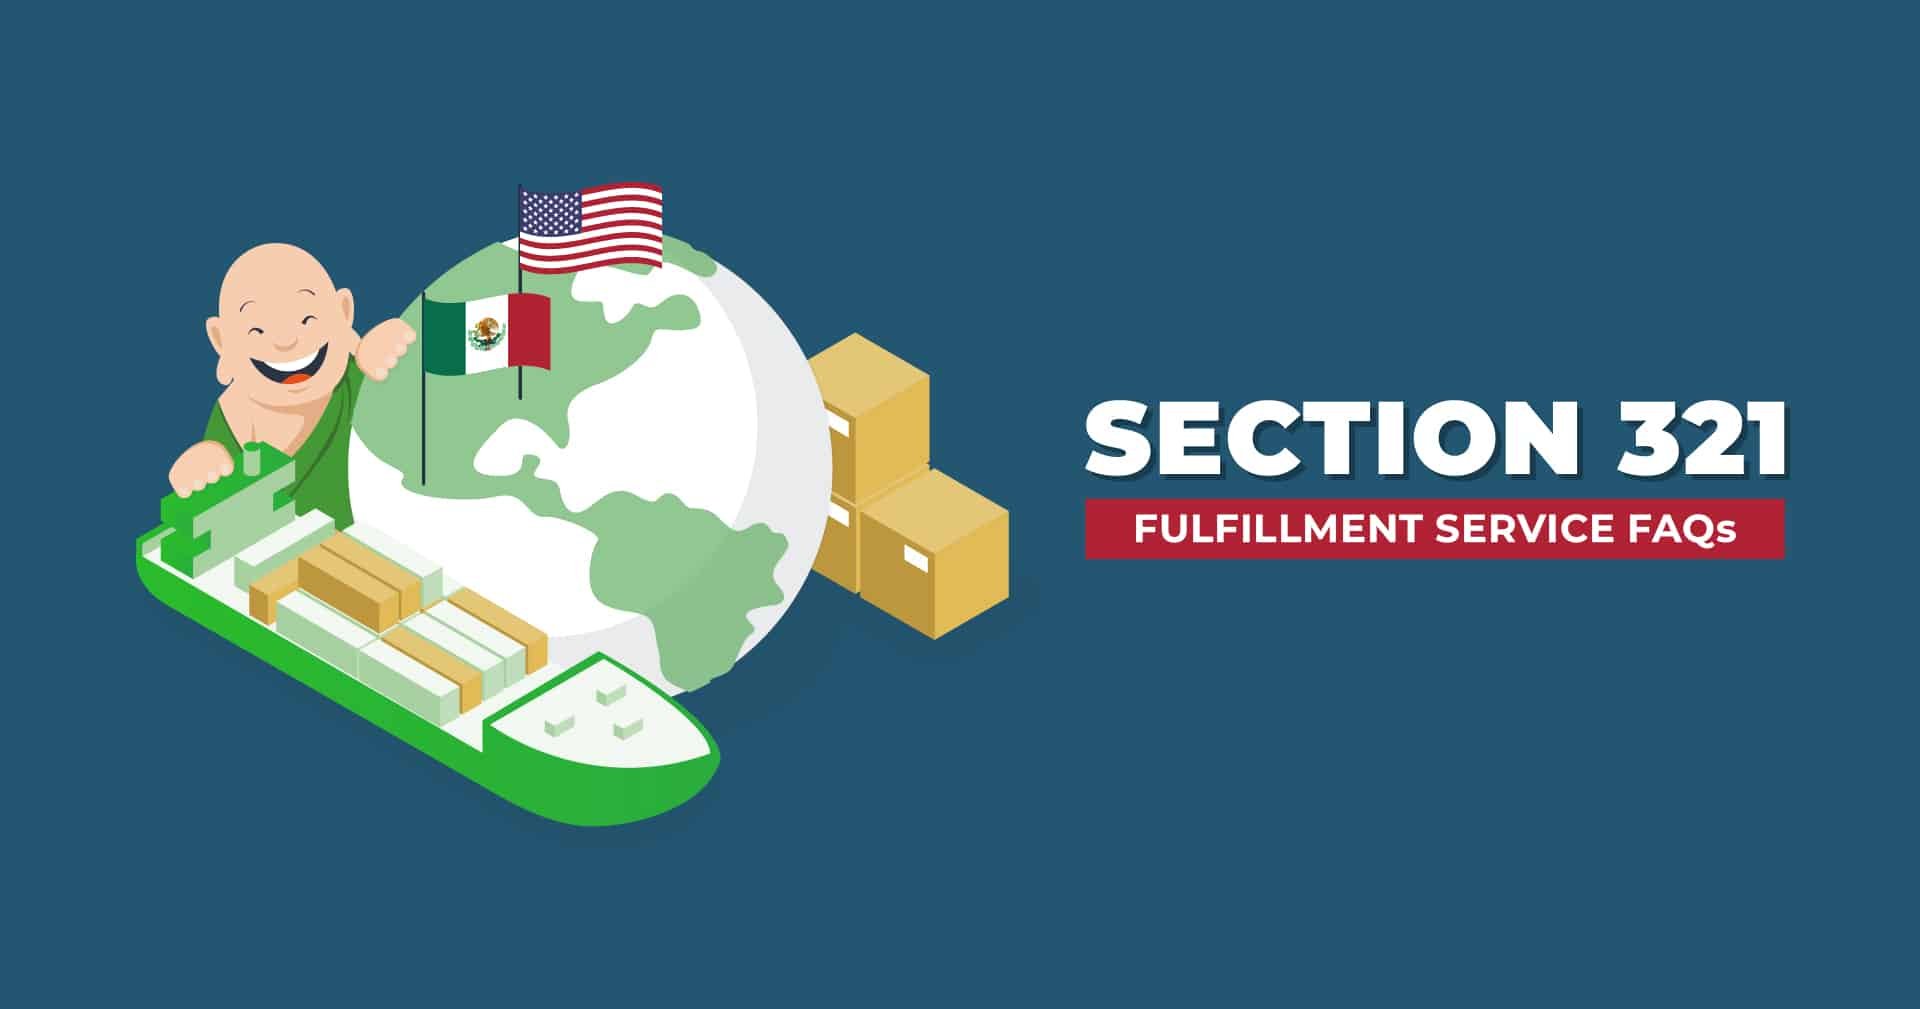 Section 321 Fulfillment Service FAQs